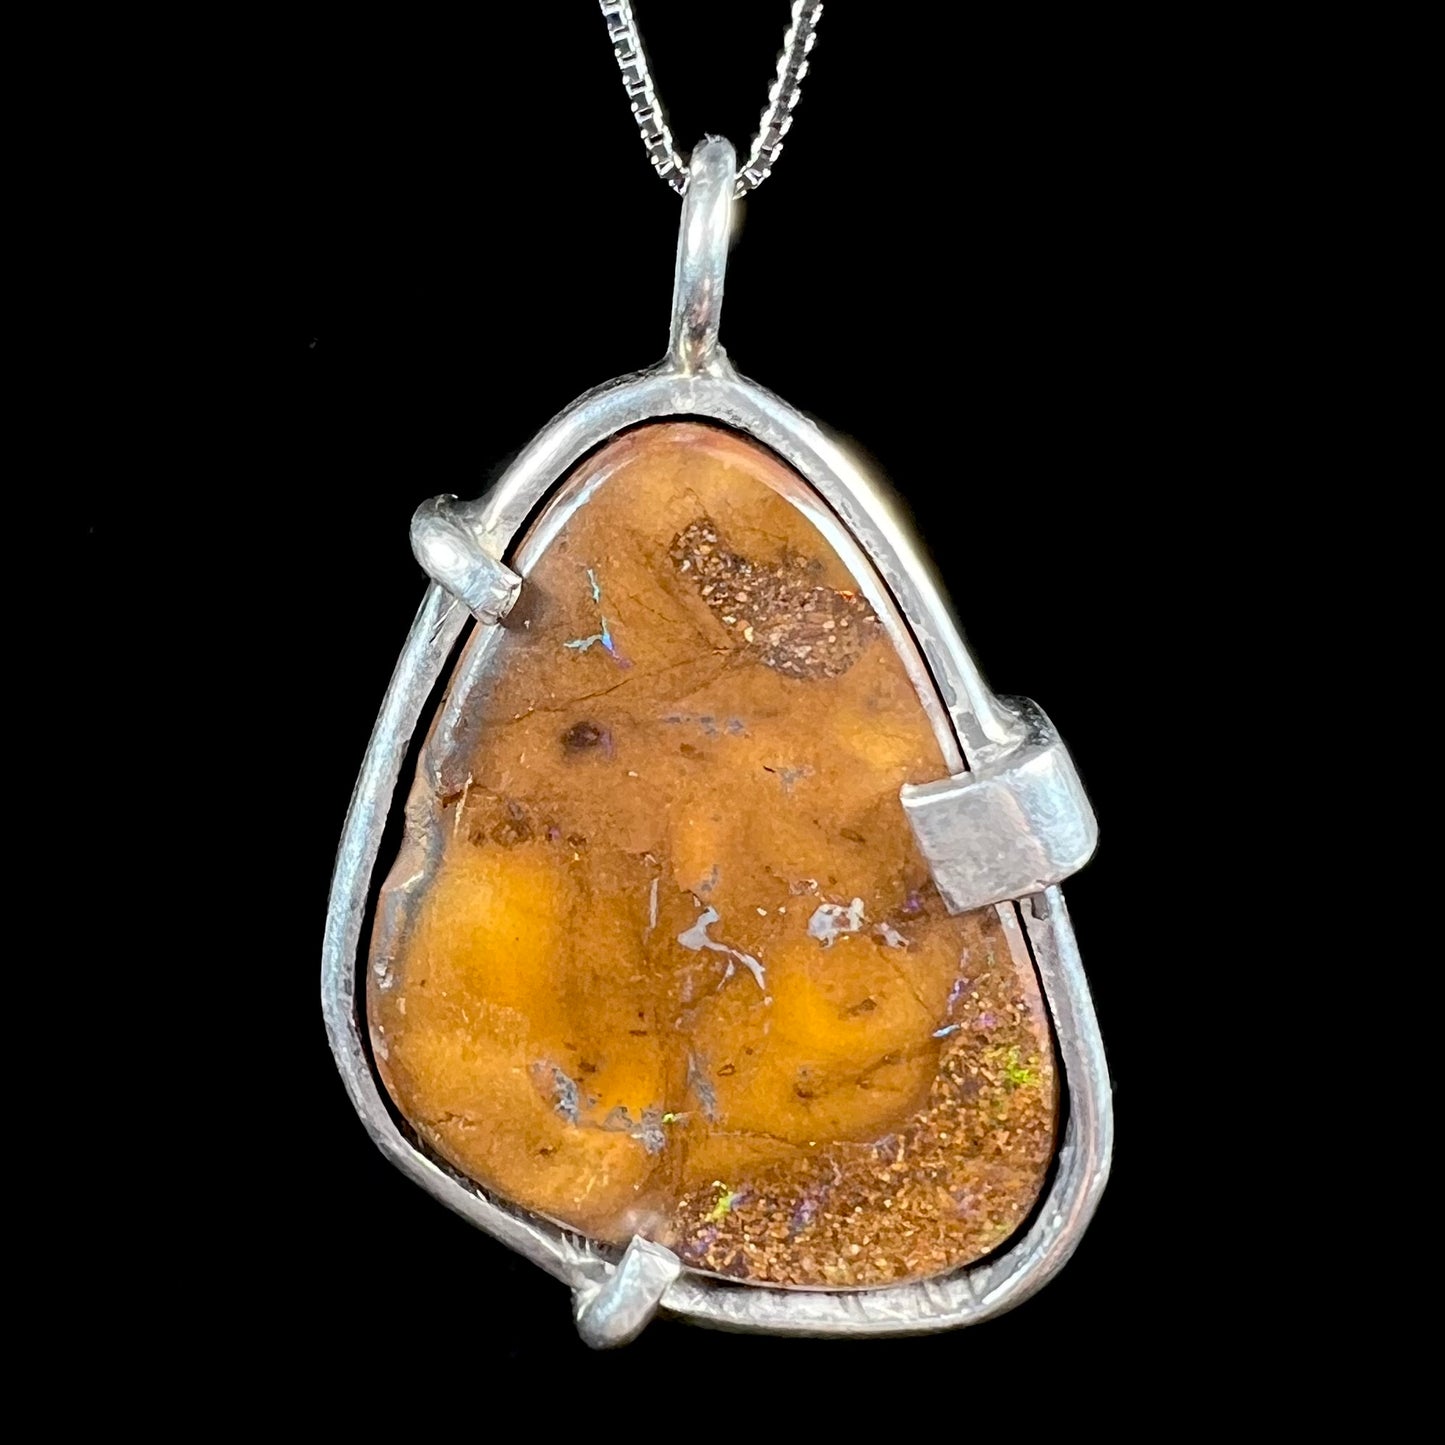 A handmade sterling silver pendant bezel and prong set with a natural boulder opal stone.